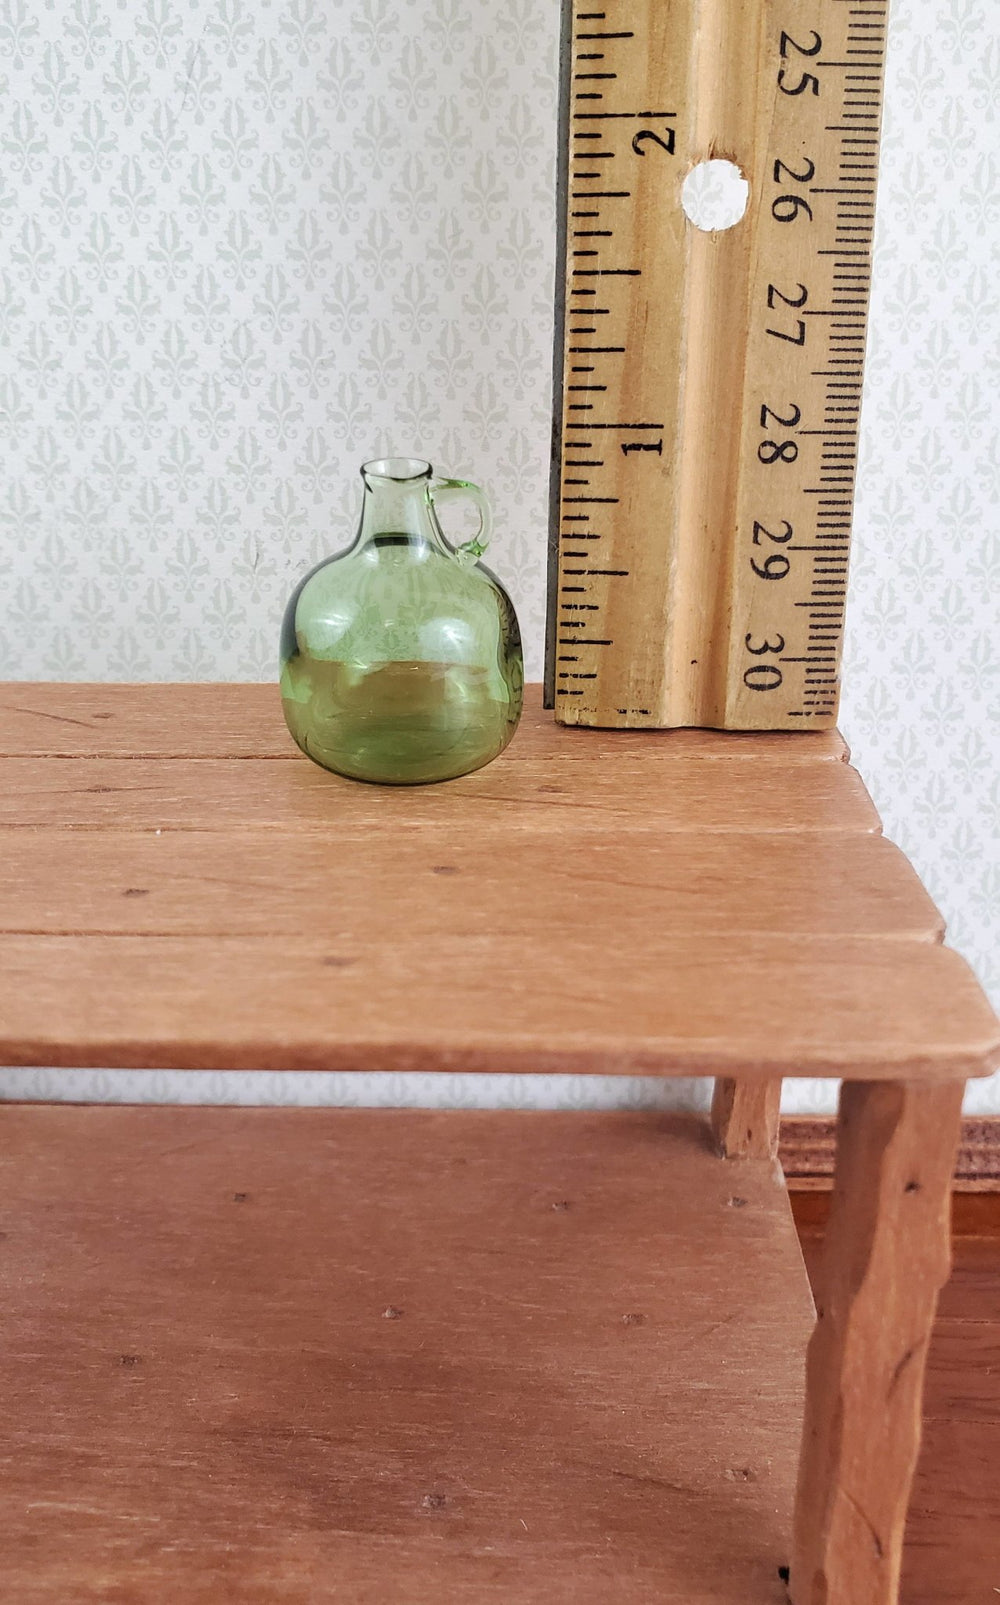 Dollhouse Miniature Carboy or Demijohn Green Glass Bottle with Handle 1:12 Scale - Miniature Crush